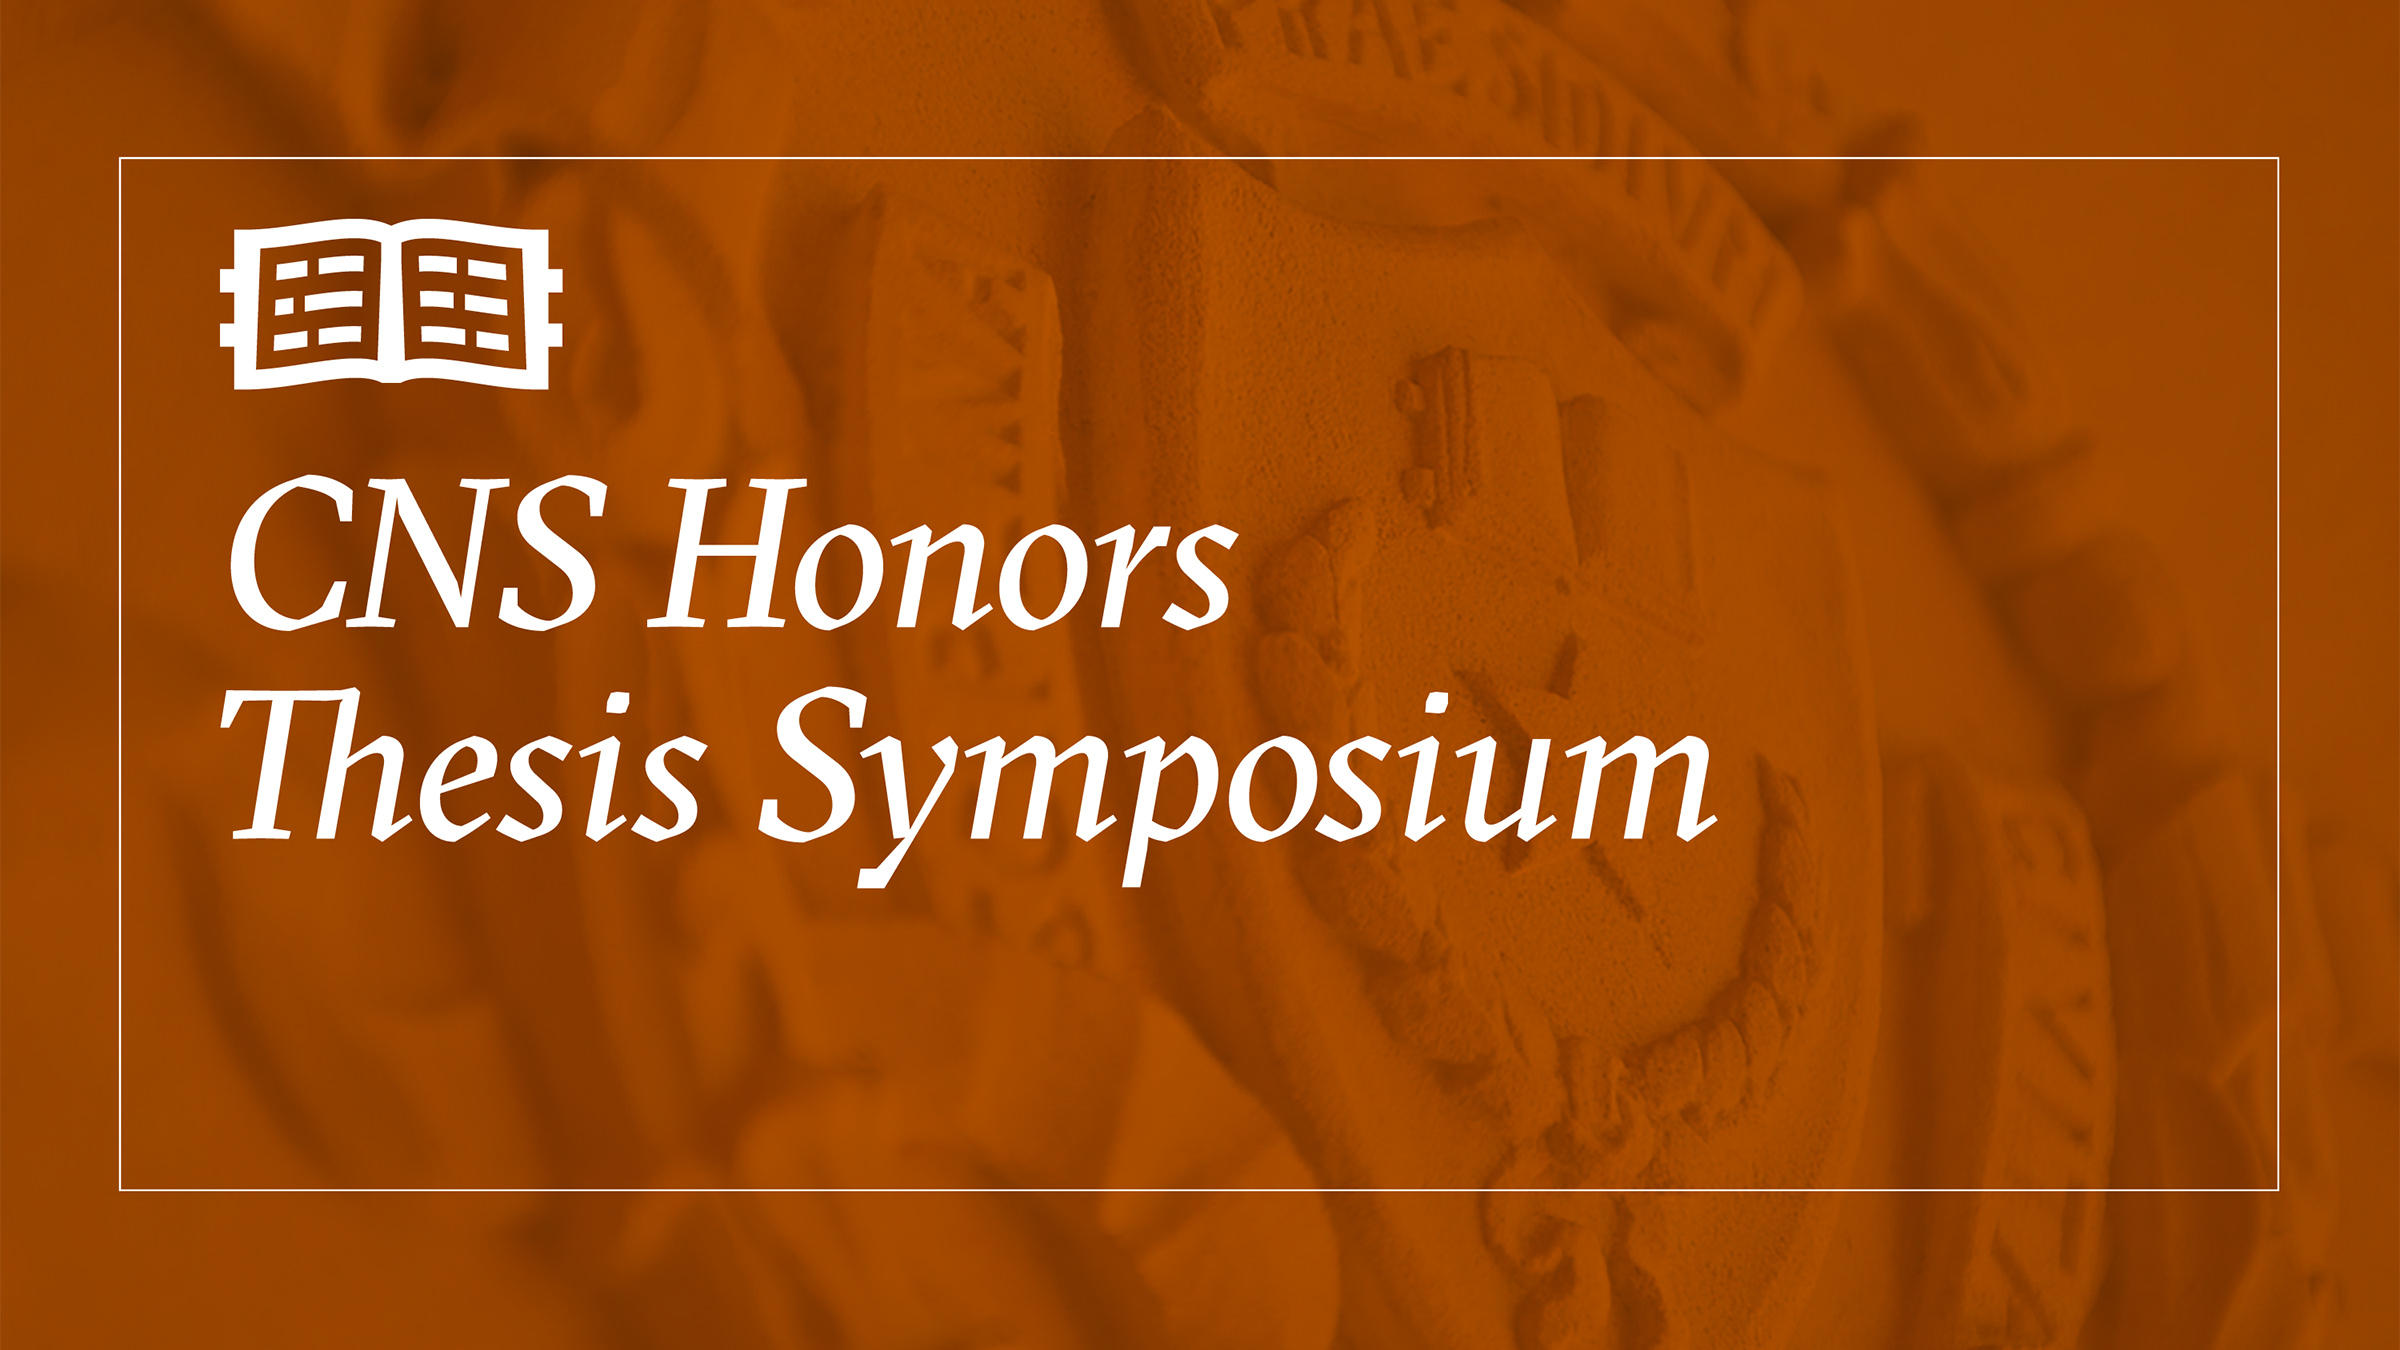 CNS Honors Thesis Symposium appears under a graphic of a book and against the backdrop of the UT shield